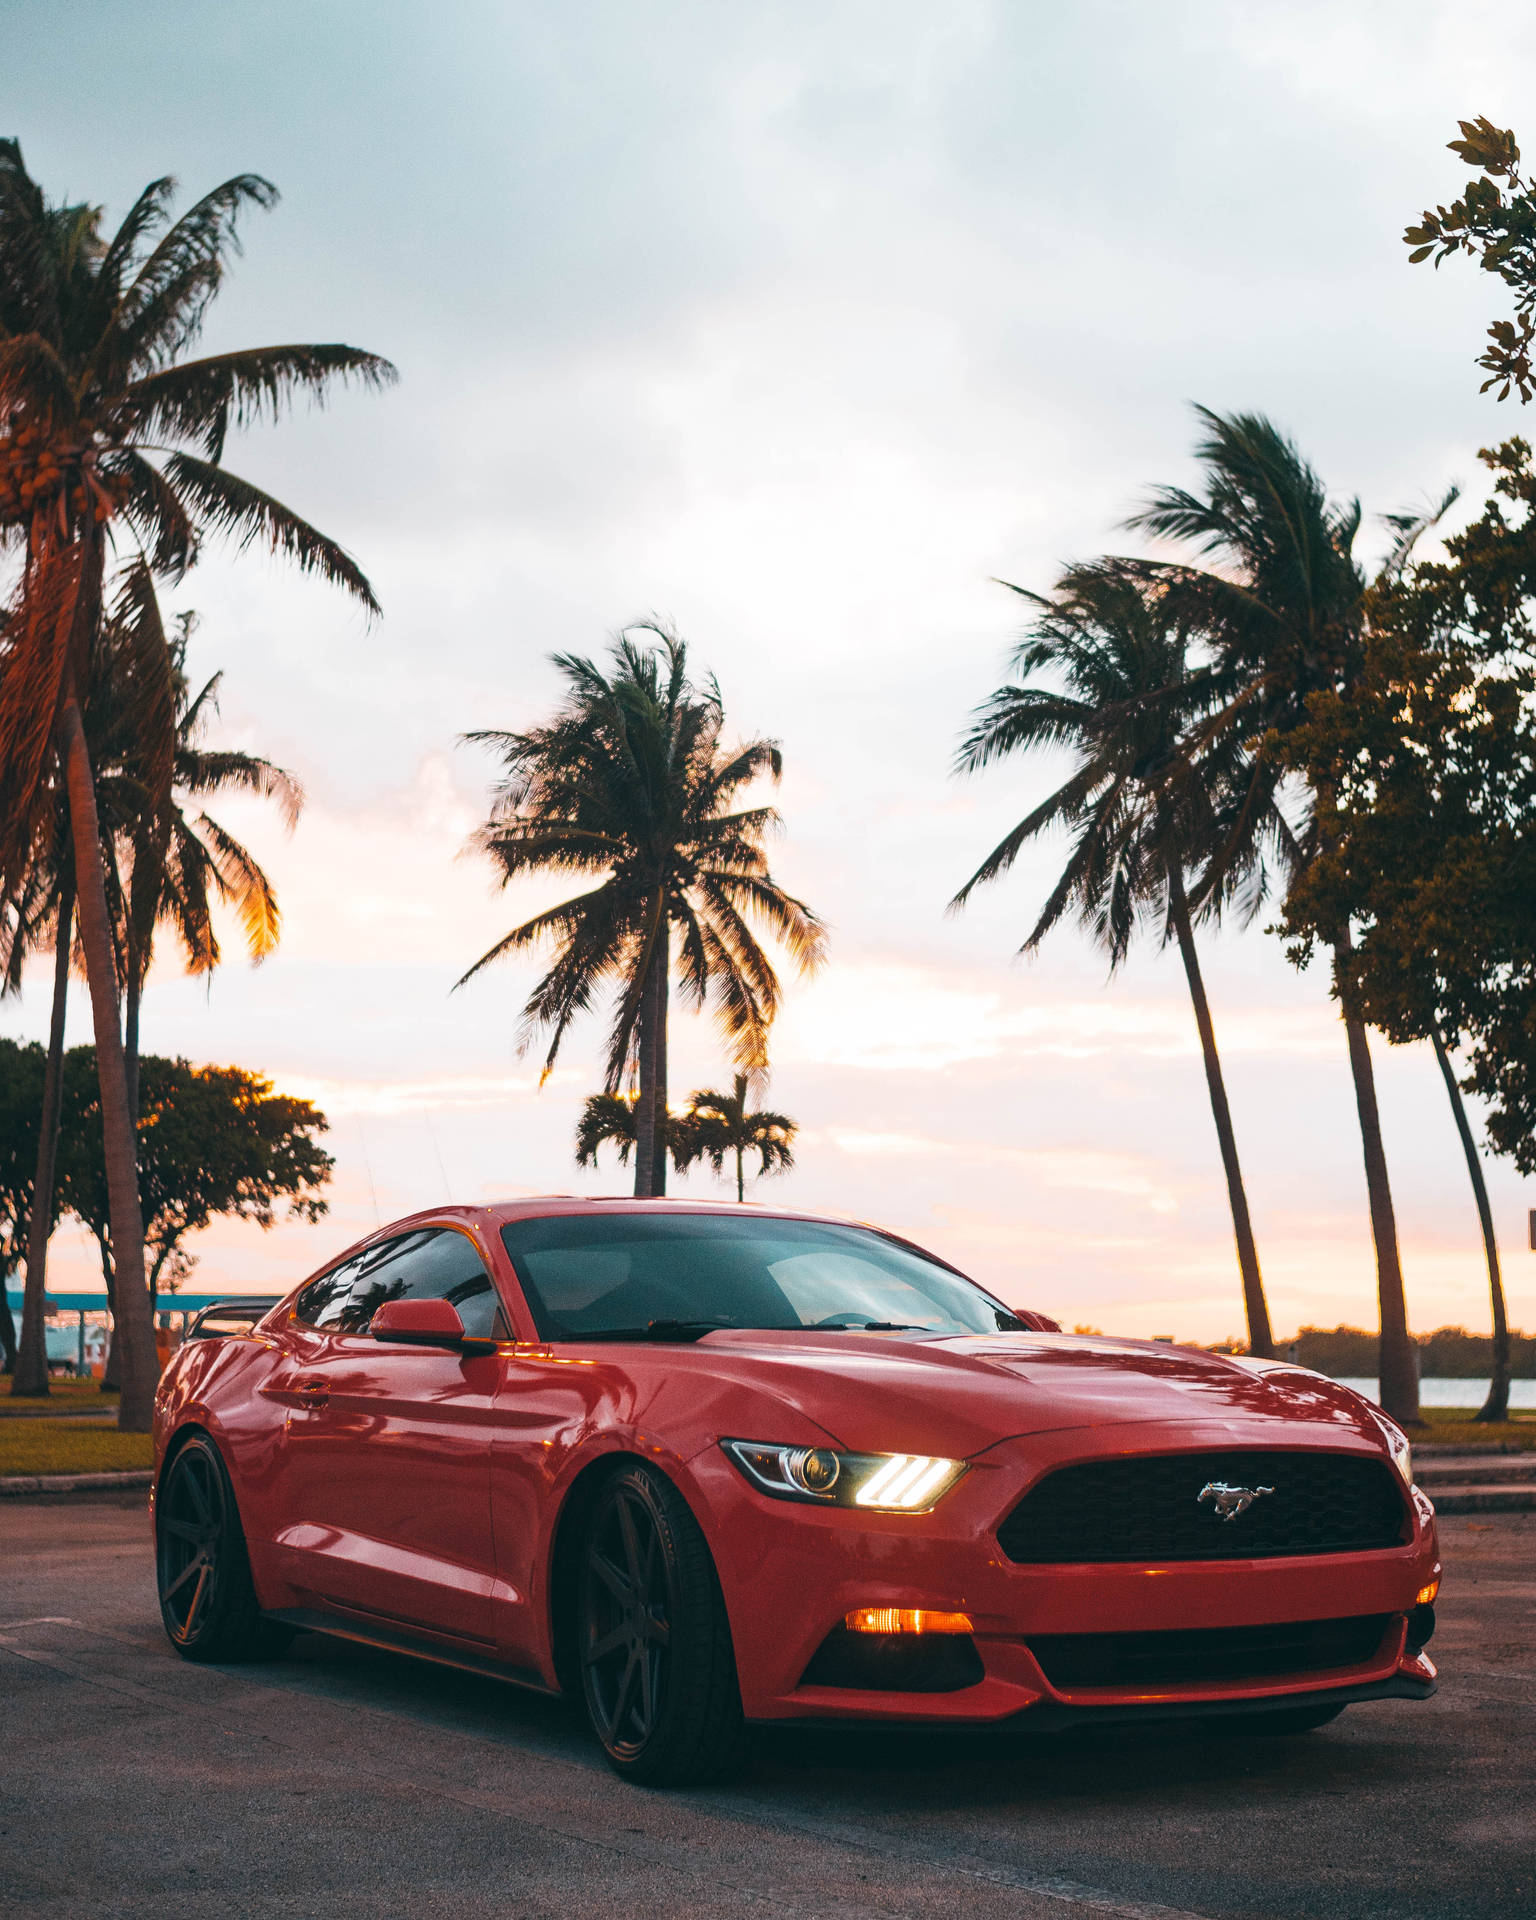 Red Ford Mustang Gt In Sun Set Palm Trees